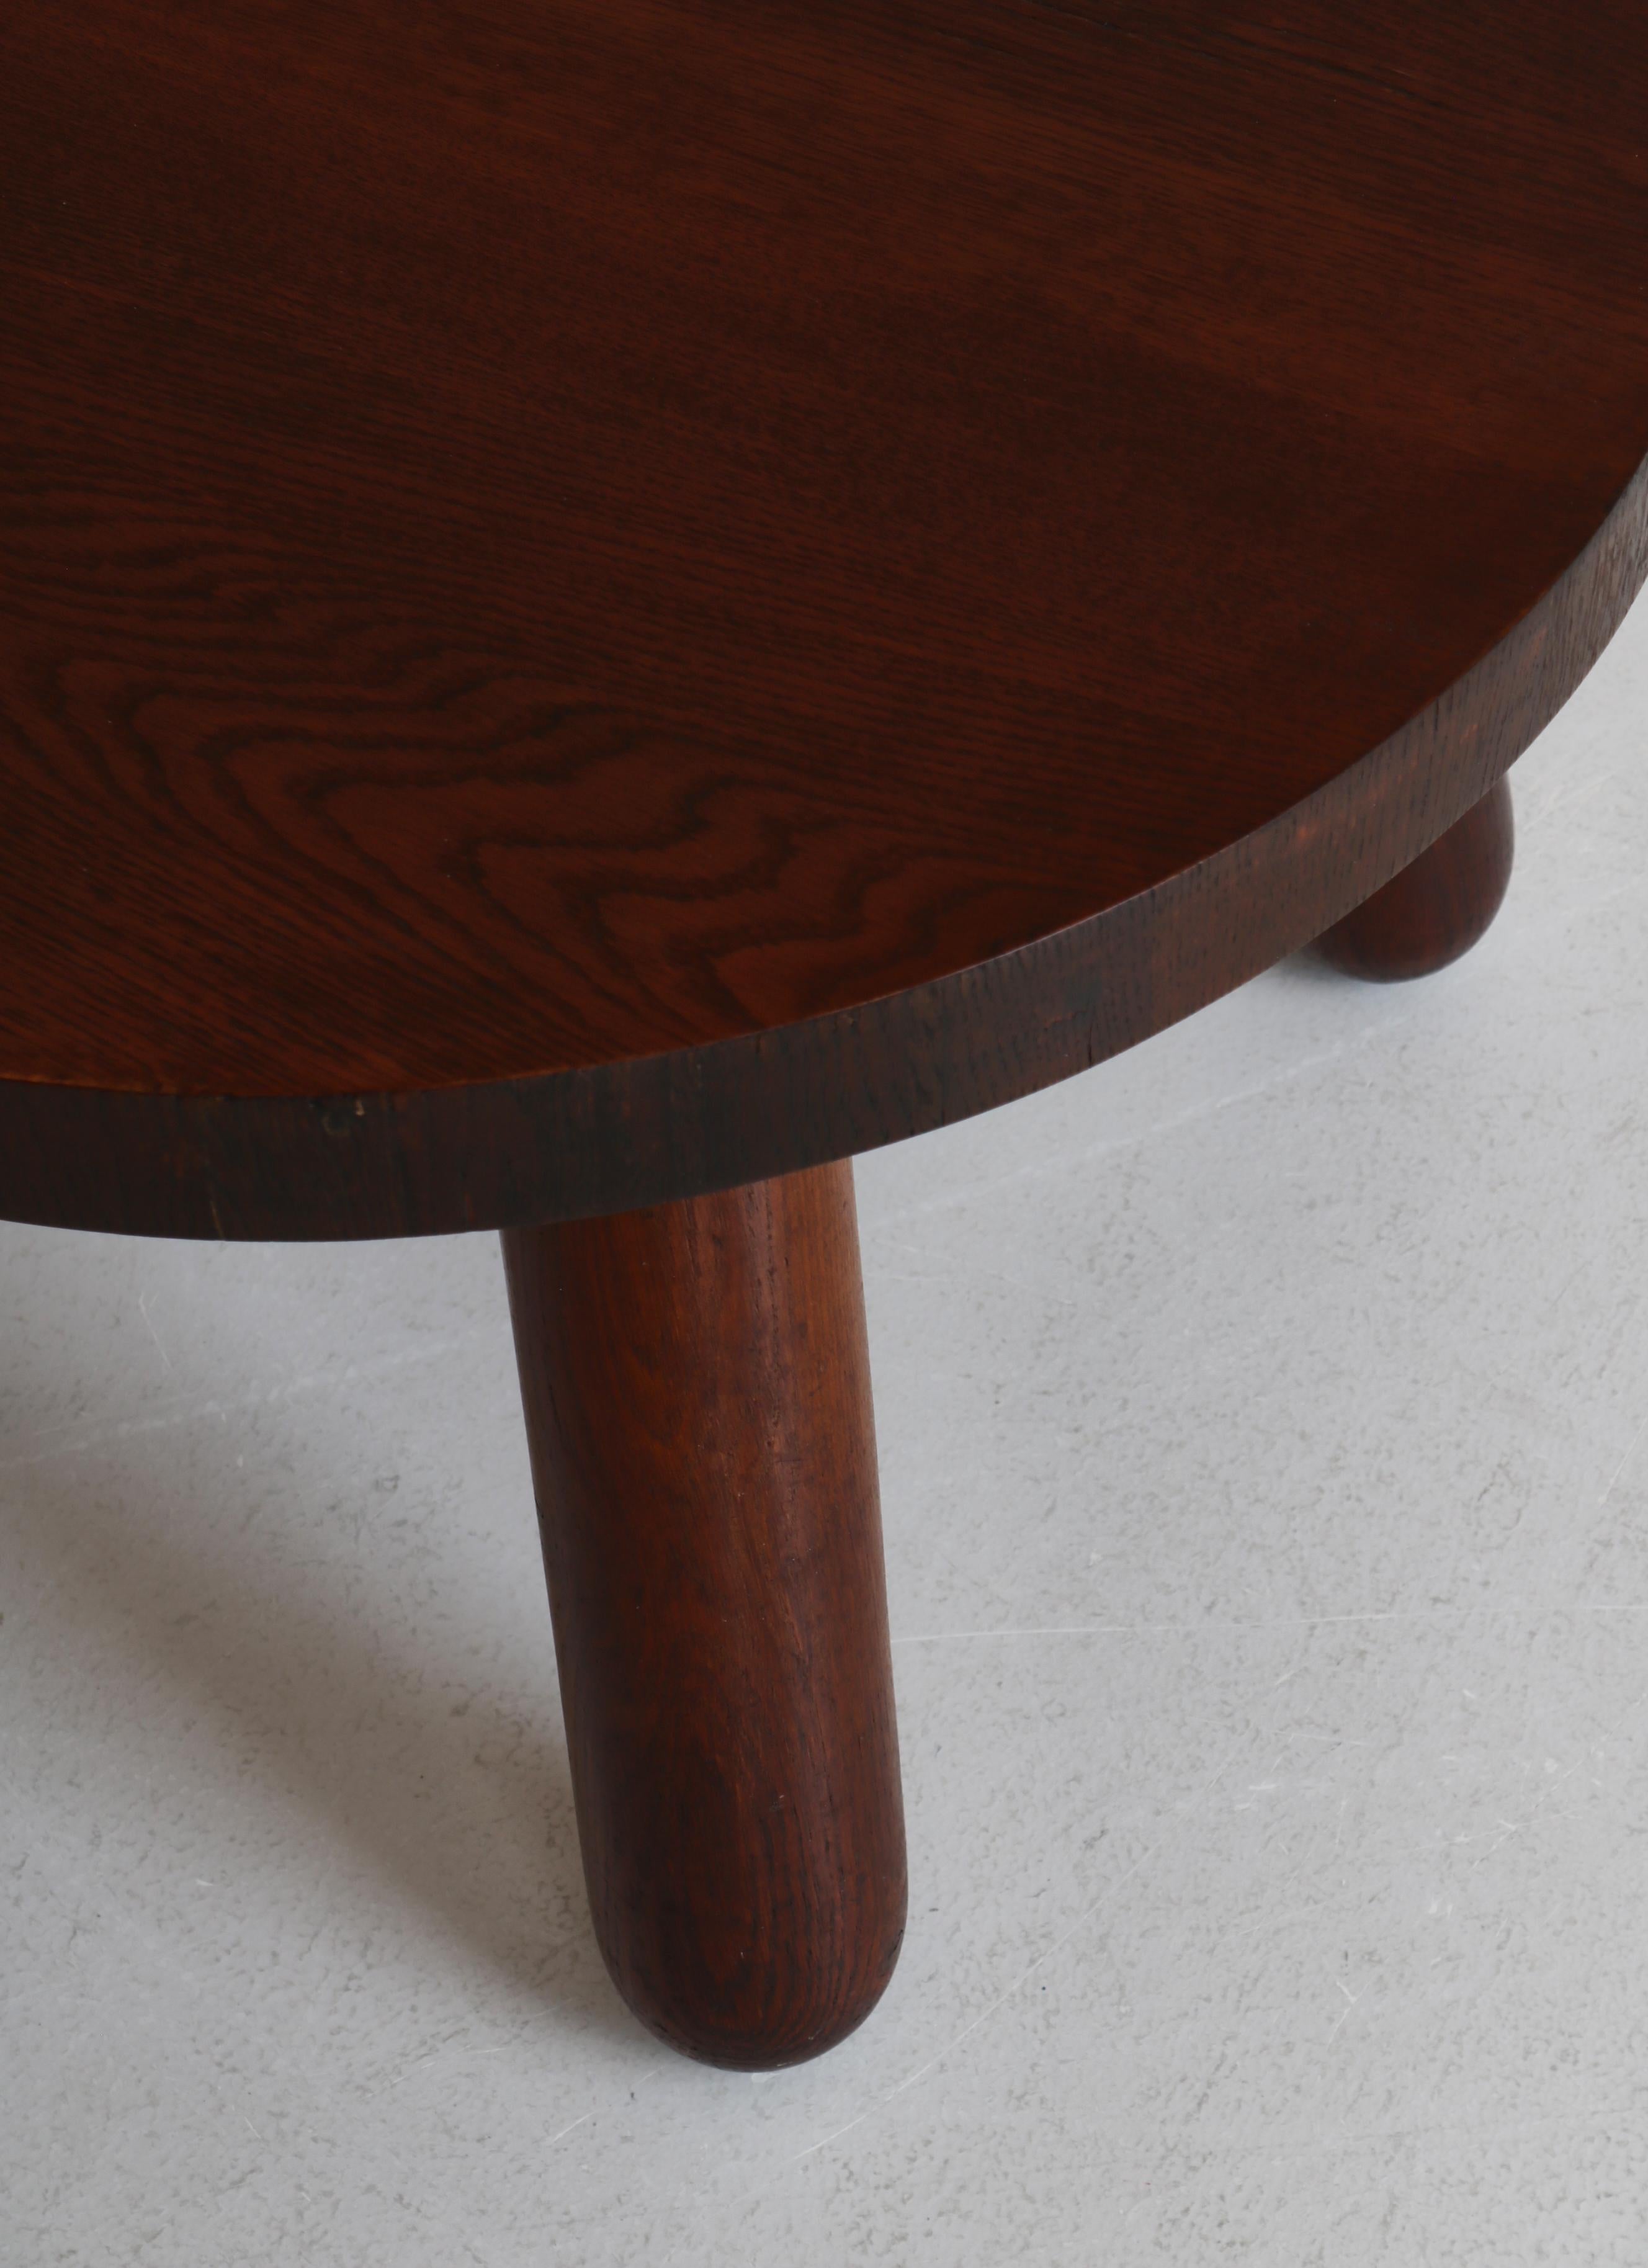 Chunky Danish Modern Side Table in Stained Oak by Otto Færge, Denmark, 1940s For Sale 9